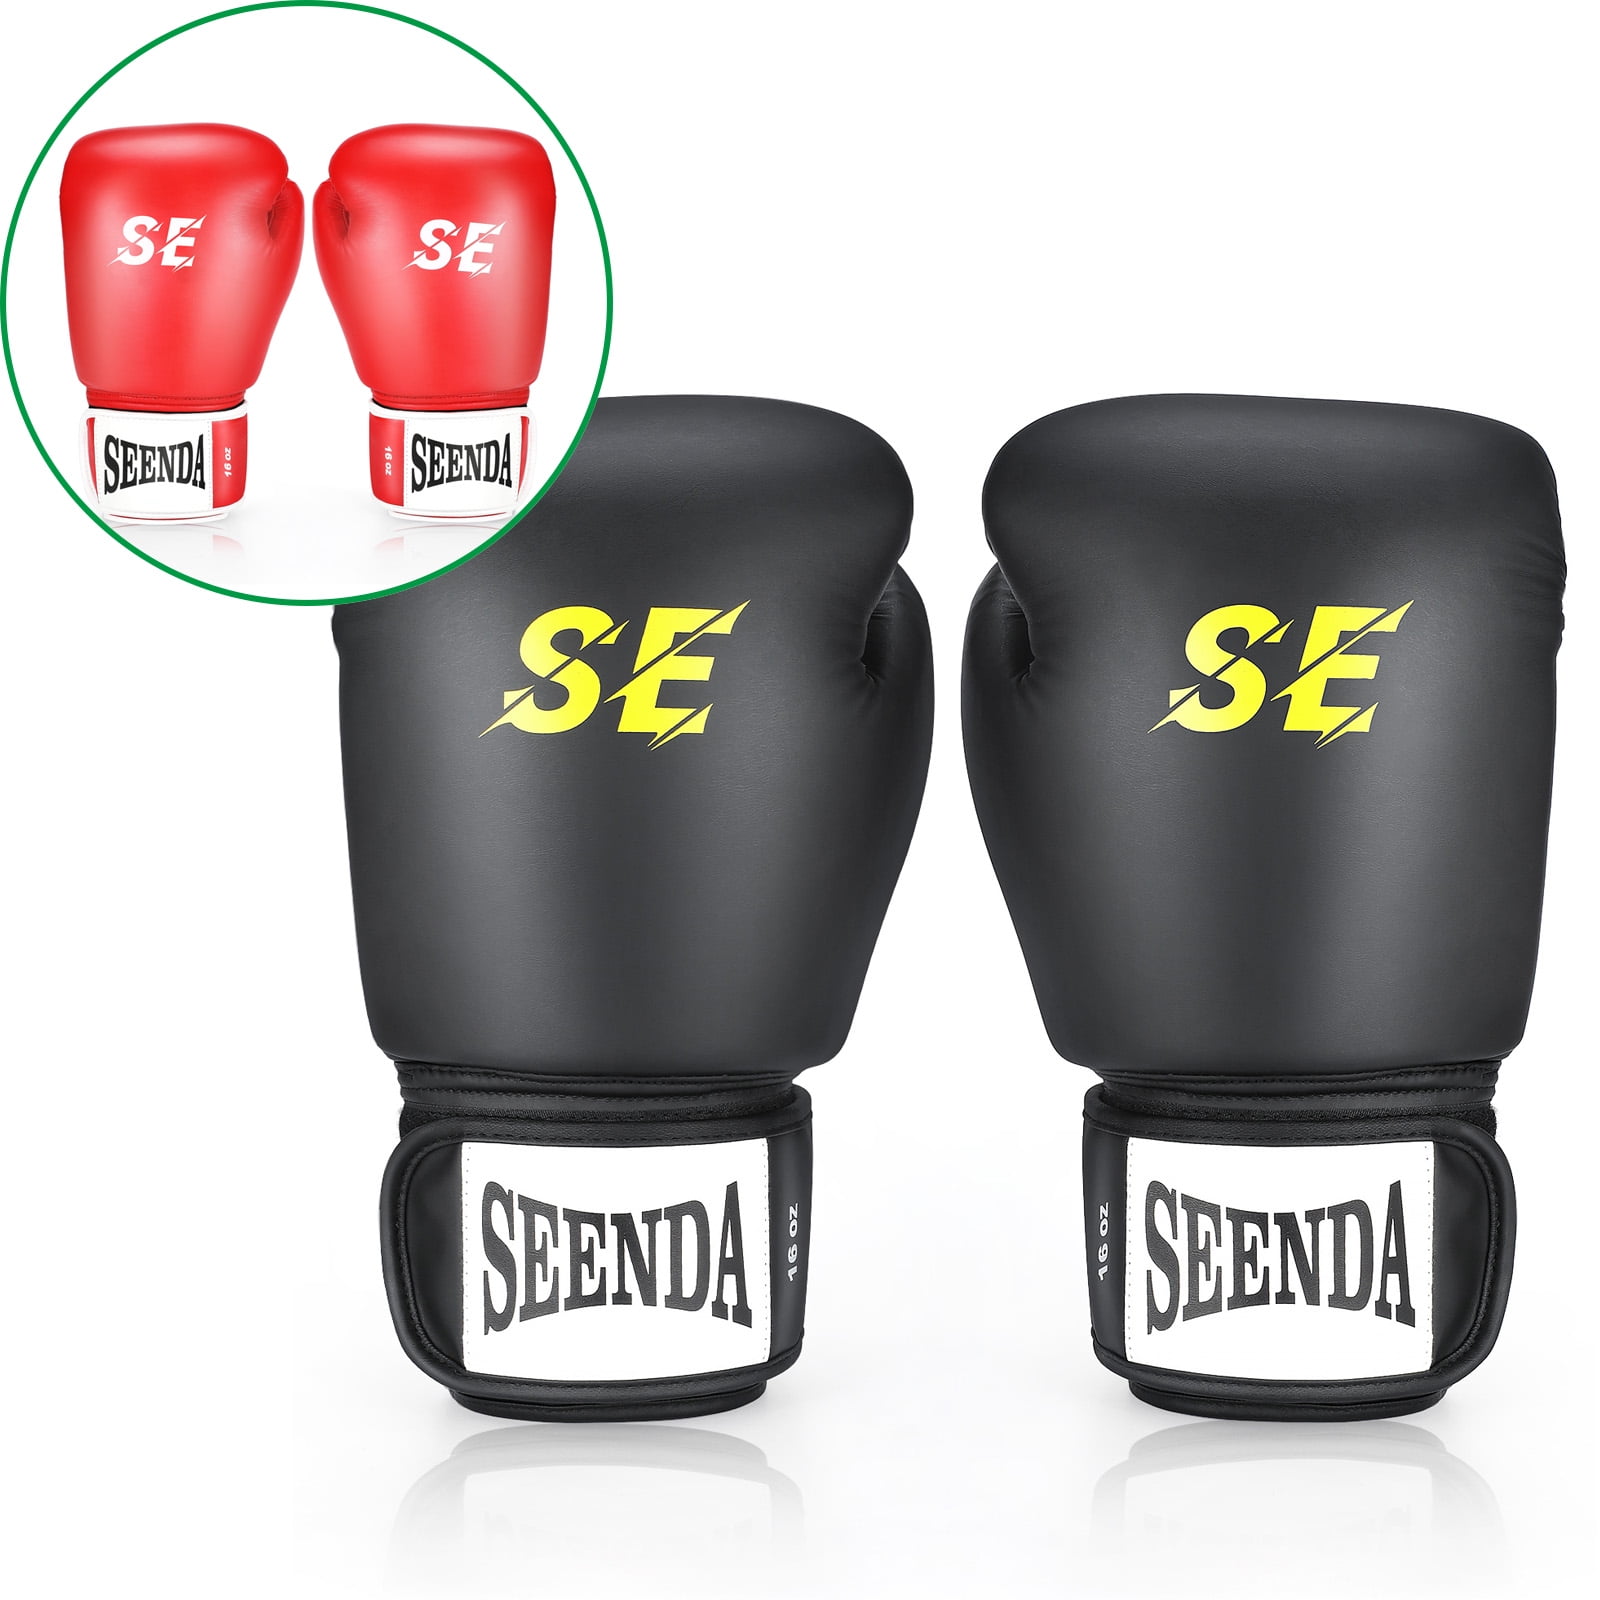 Fitness Boxing Gloves Sparring Glove Punch Bag Training MMA Mitts Bag Gloves 